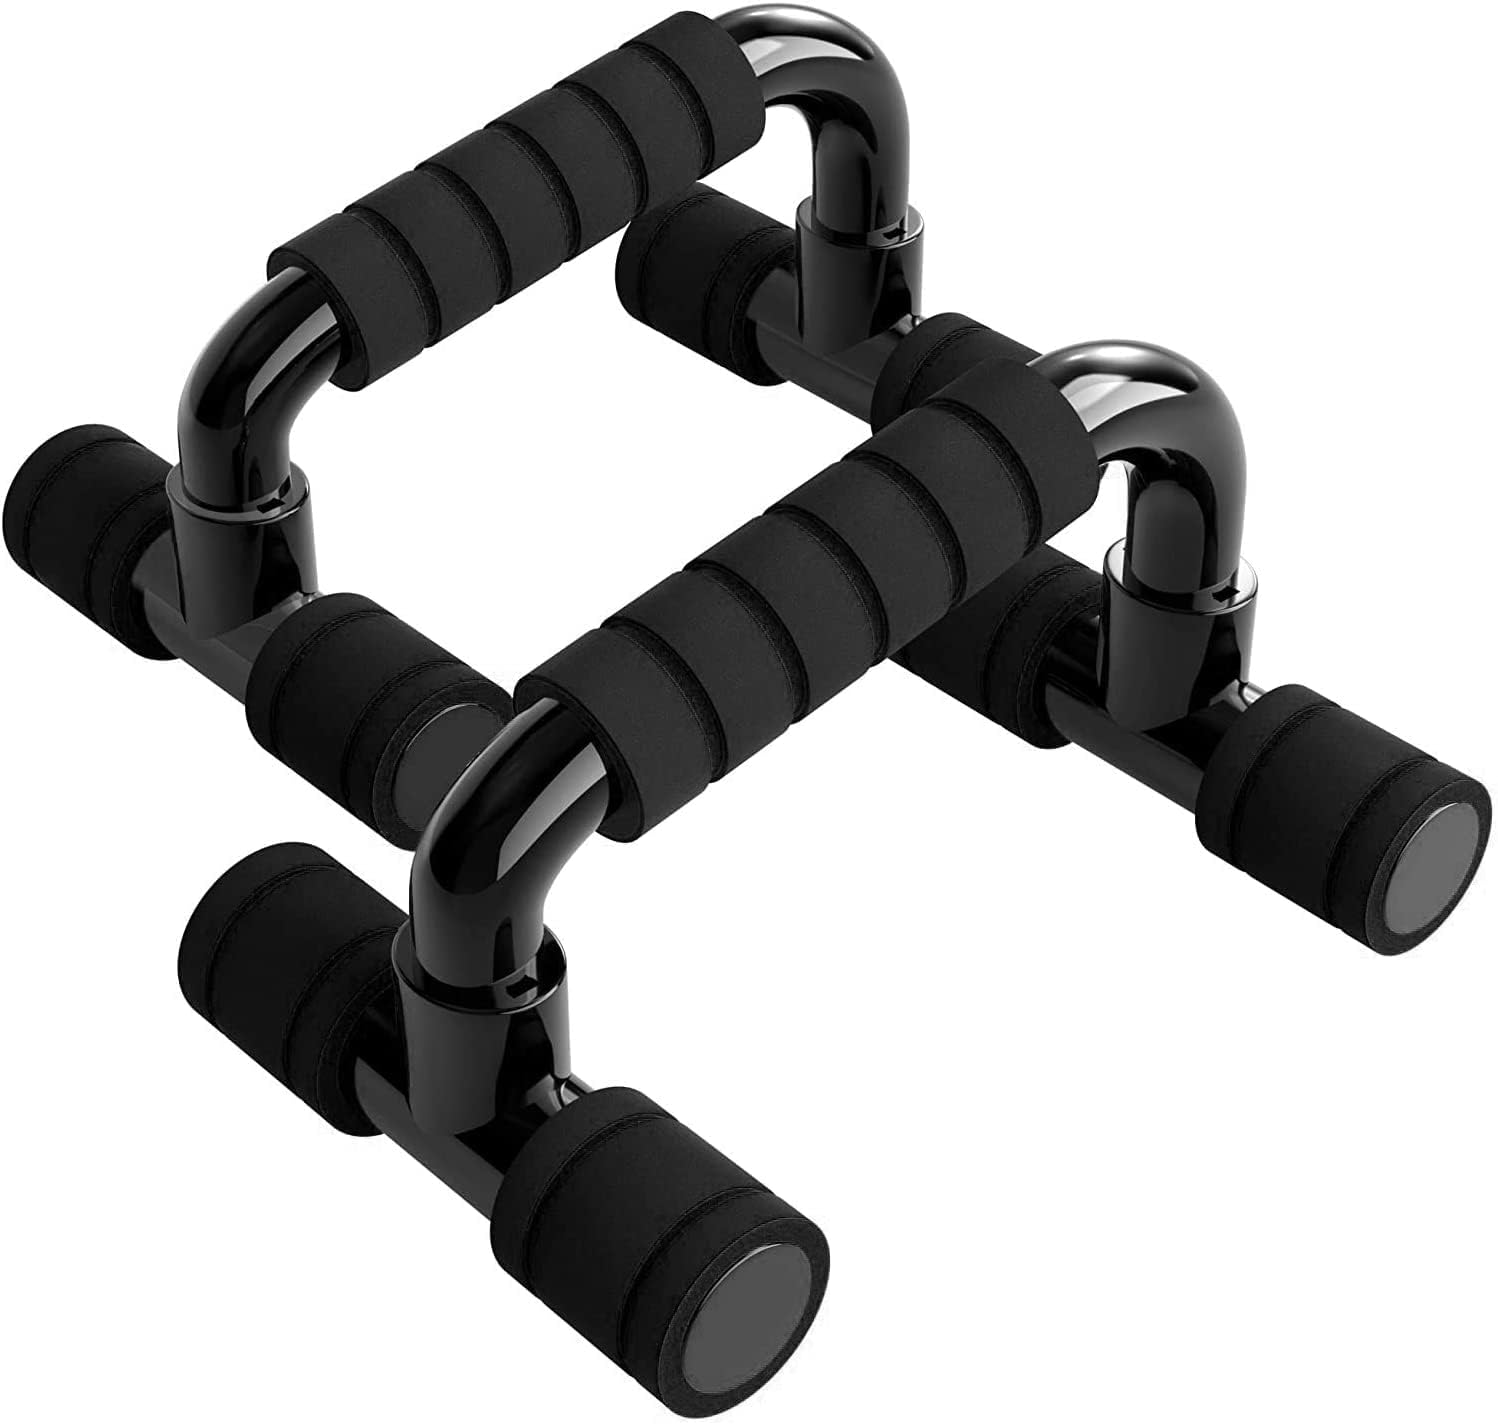 VIO Push Up Bar Stand For Gym & Home Exercise (Assorted Colrs)